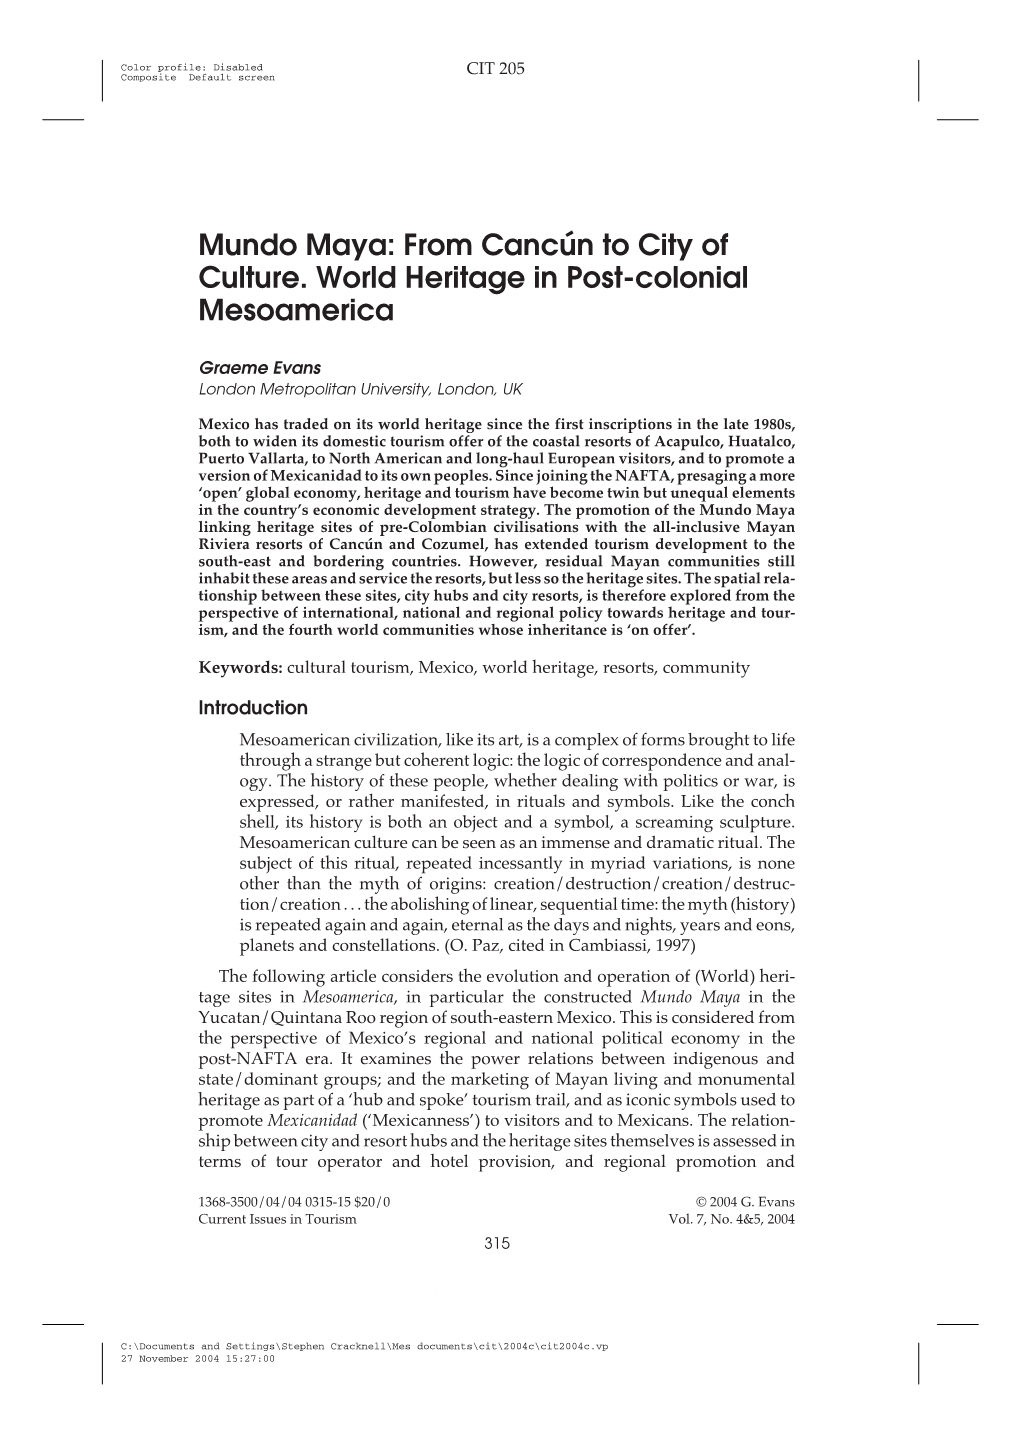 Mundo Maya: from Cancún to City of Culture. World Heritage in Post-Colonial Mesoamerica